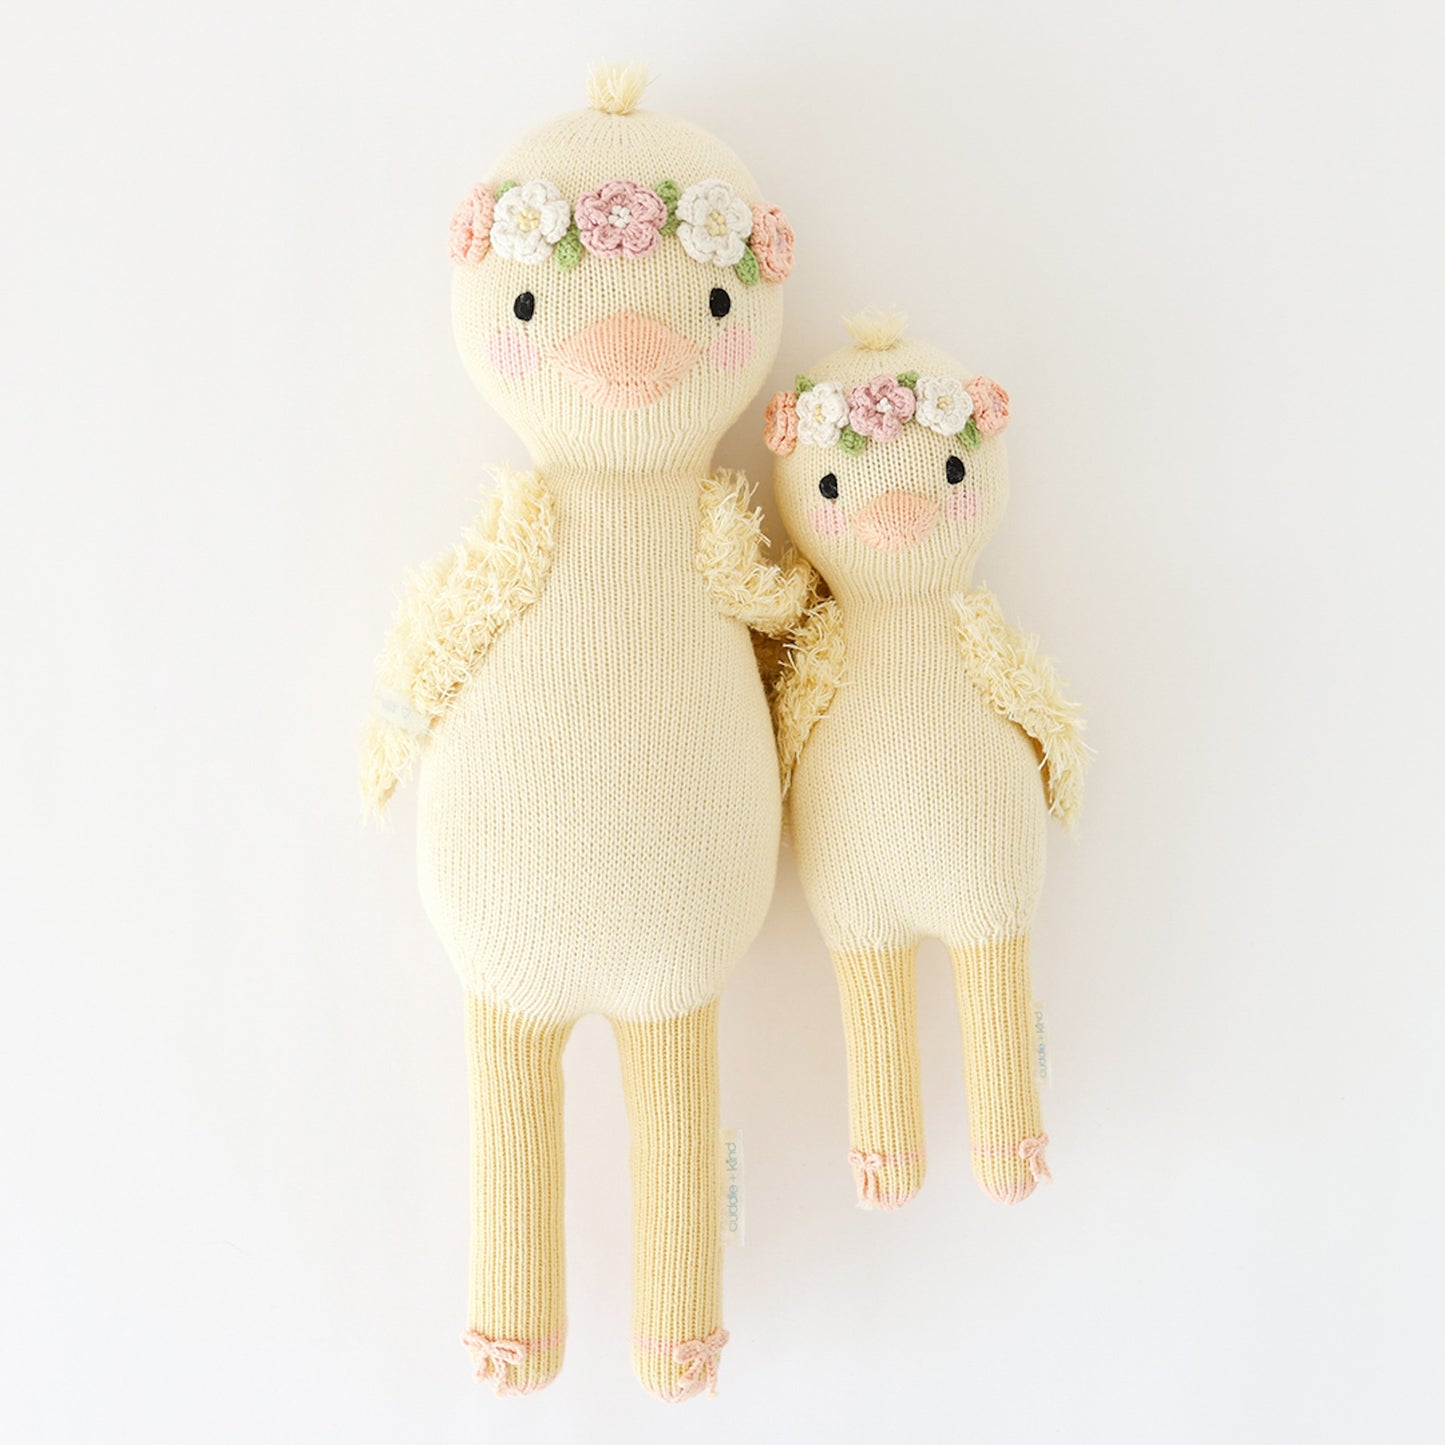 Regular and little Flora the duckling stuffed dolls lying side-by-side.